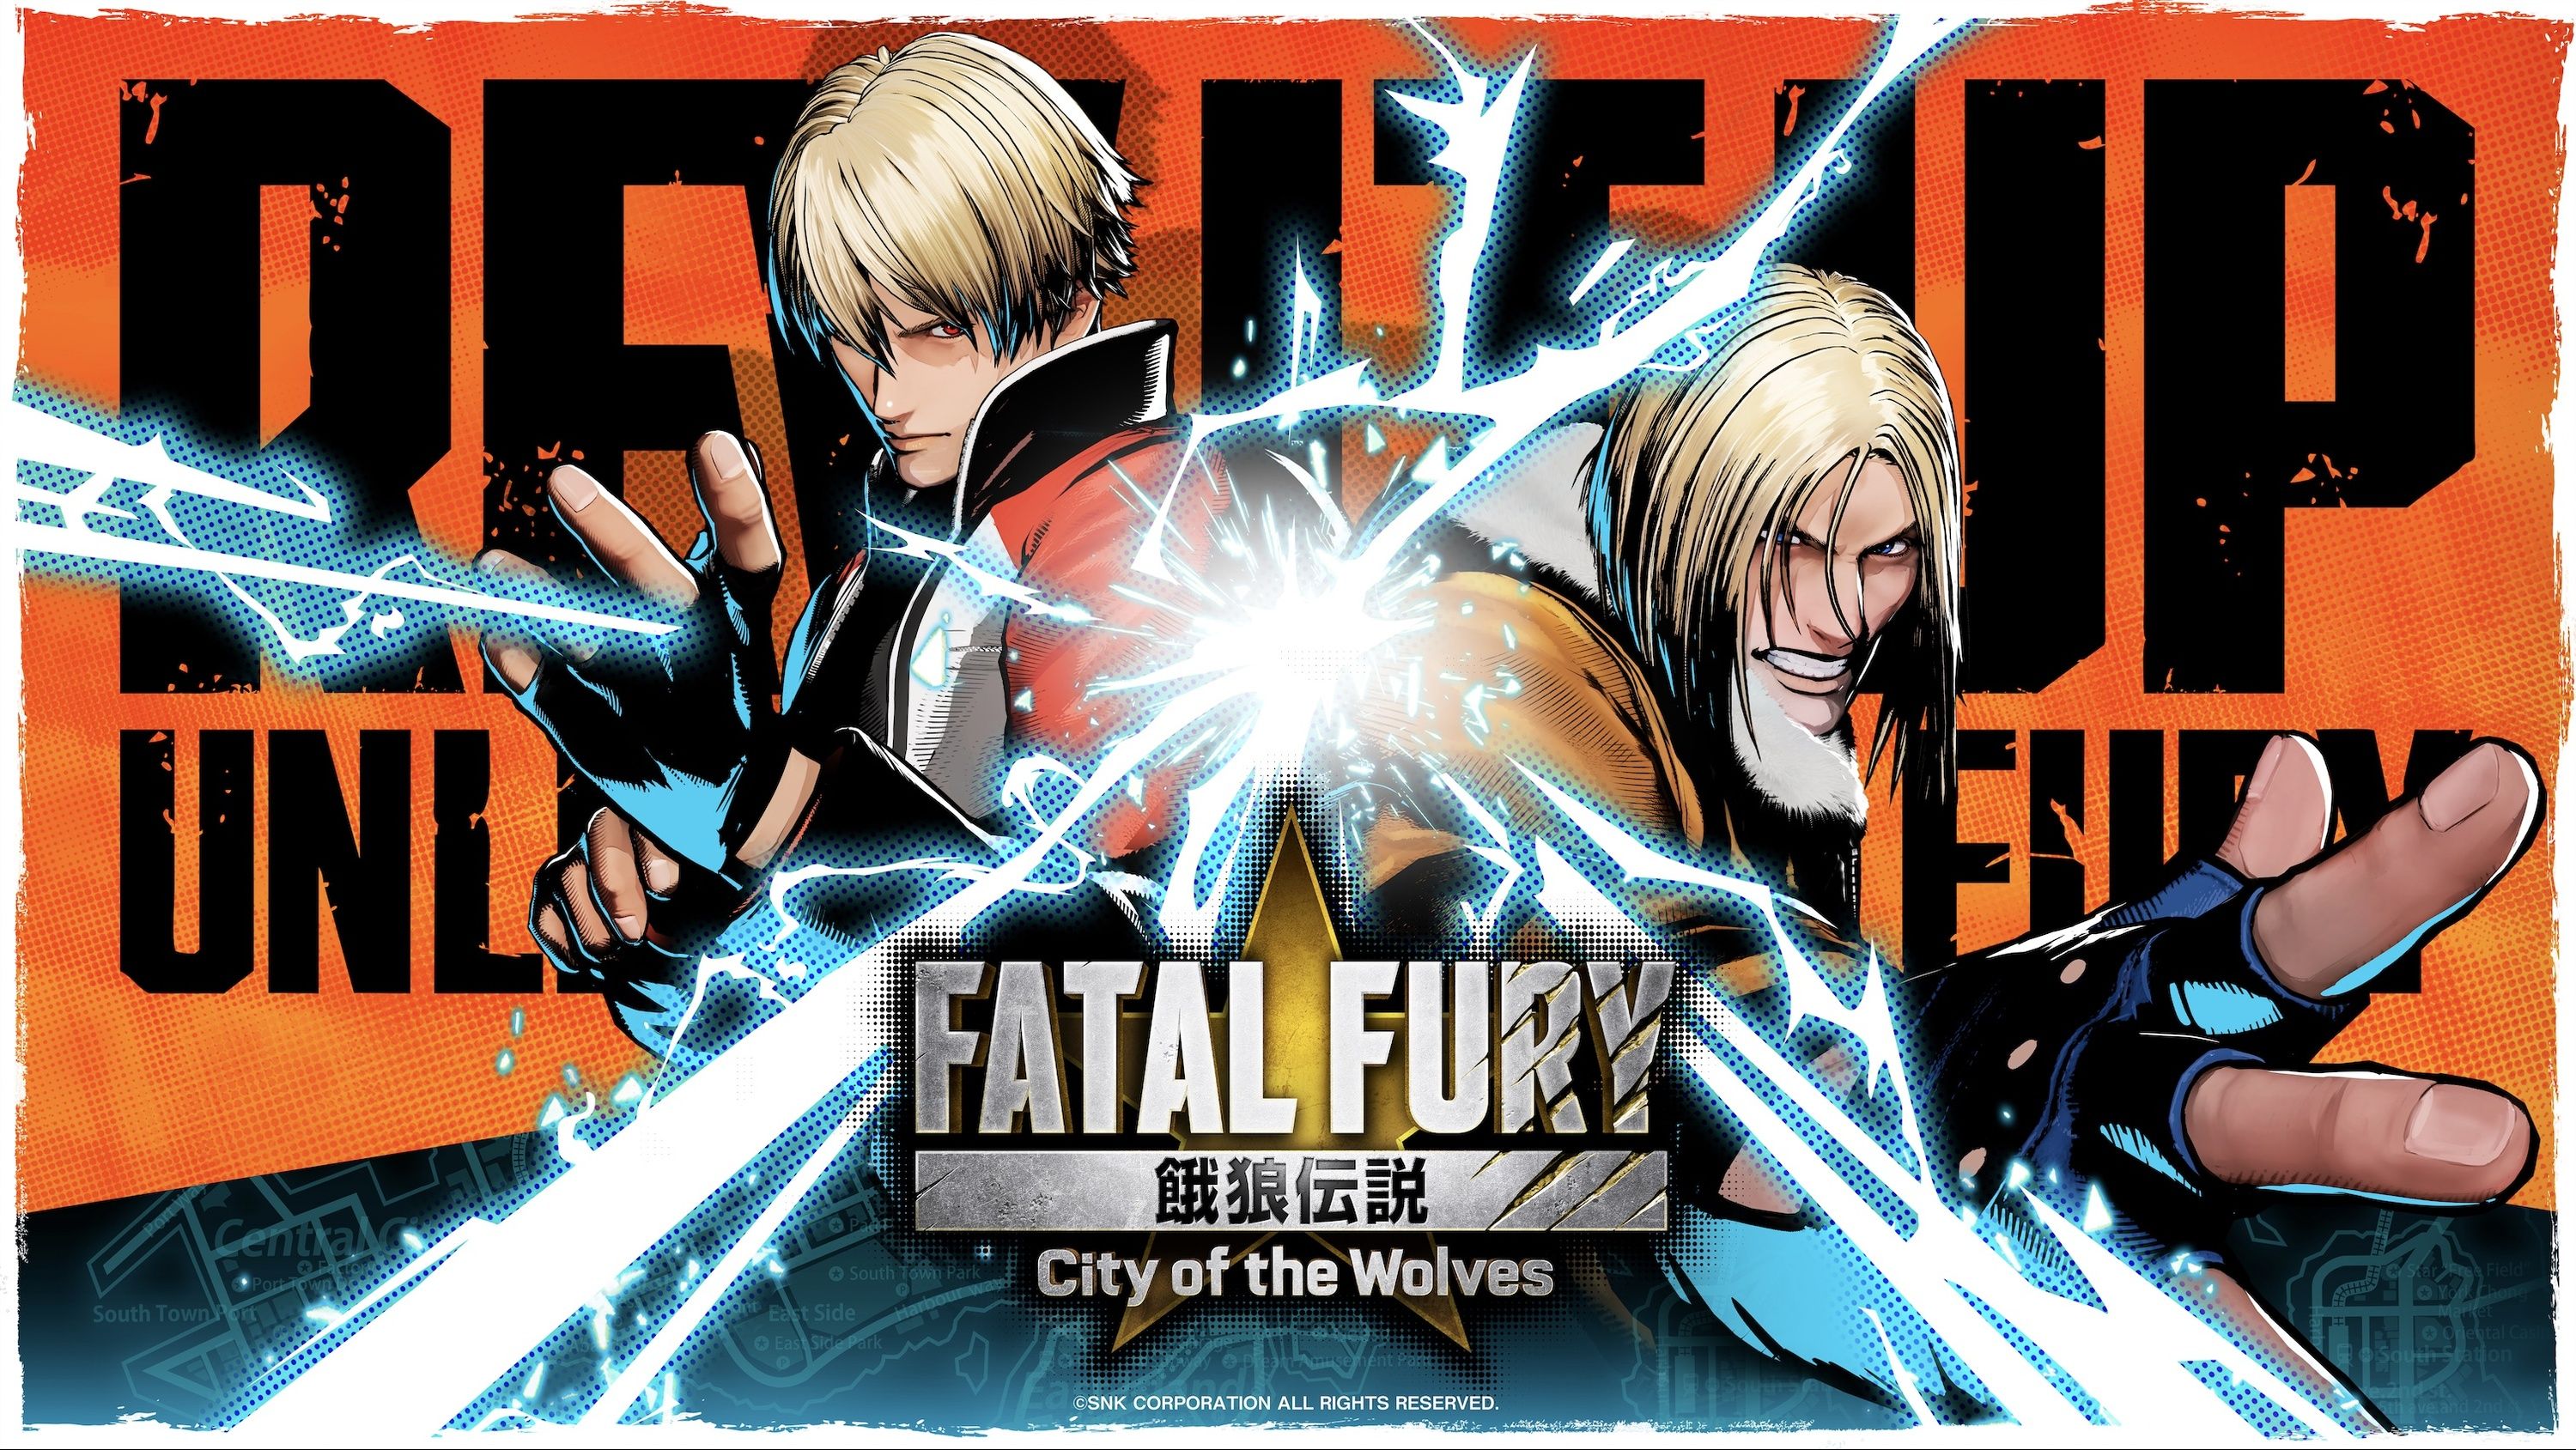 S19 Ep1332: FATAL FURY: City of the Wolves Interview and Hands-On Impressions